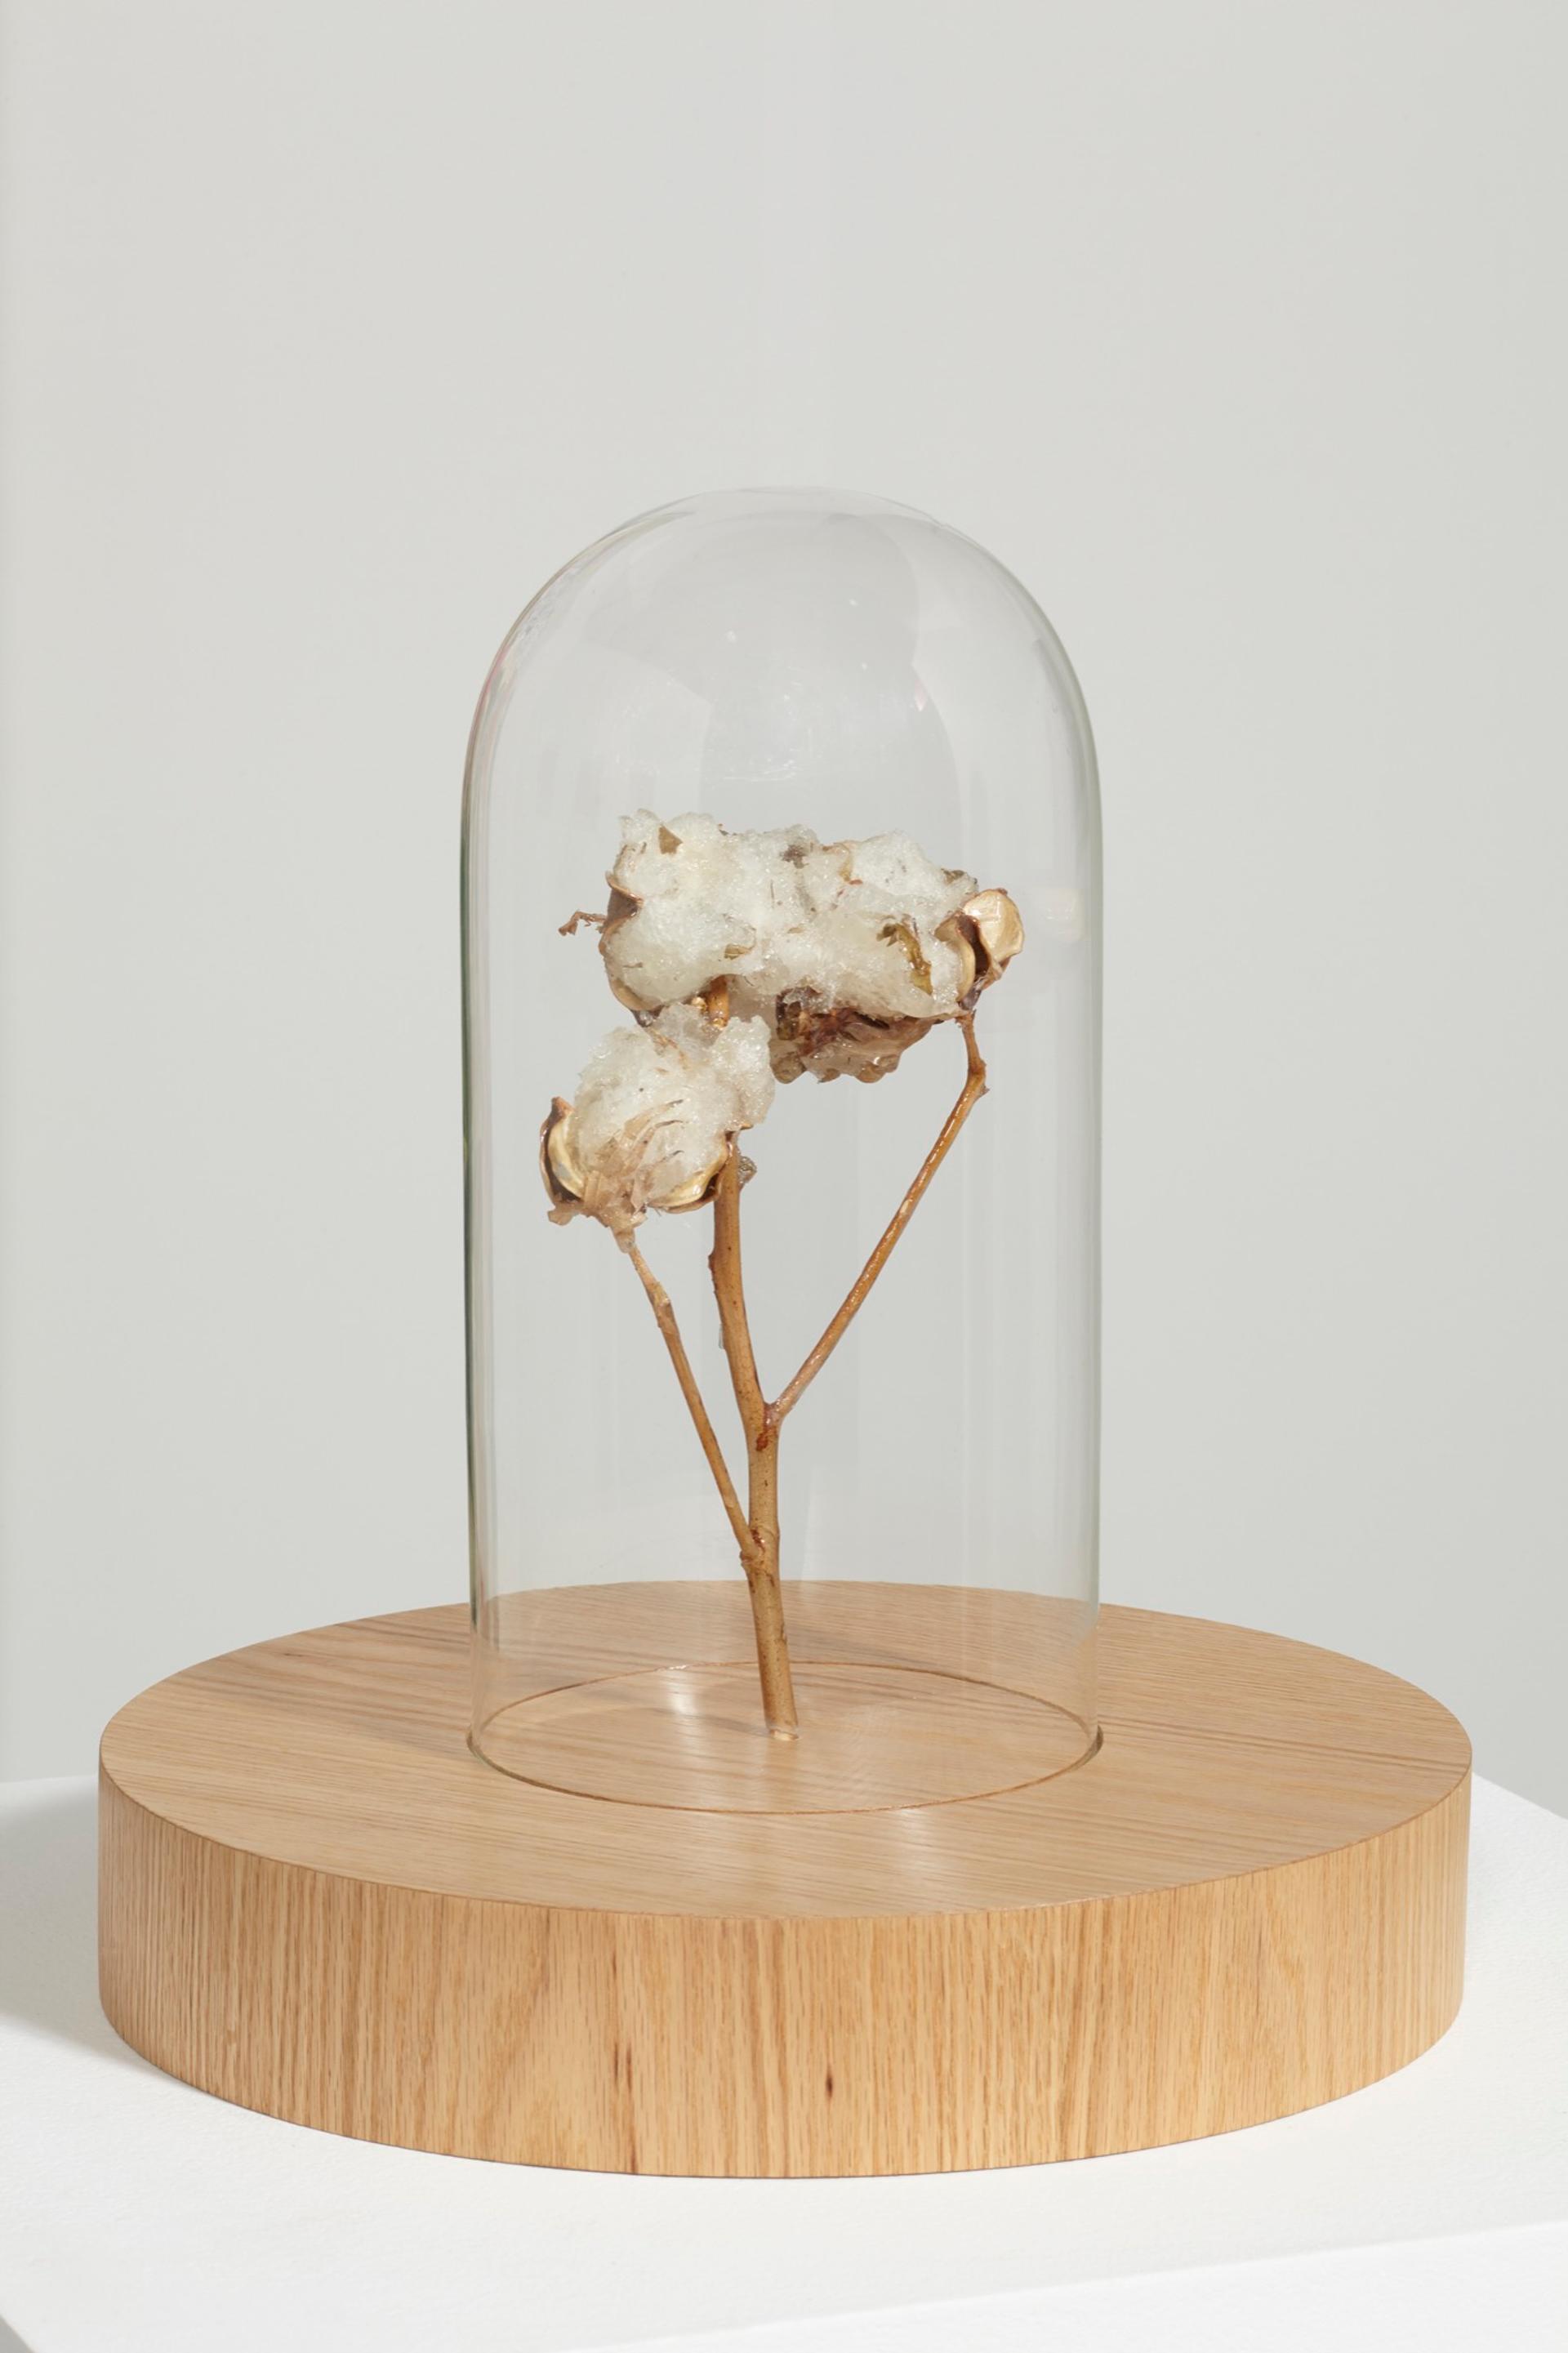 Aria Dean, 'Dead Zone (4),' 2019. Cotton branch, polyurethane, bell jar, wood, signal jammer. Image courtesy the artist and Château Shatto, Los Angeles. Photo: Joshua Schaedel.